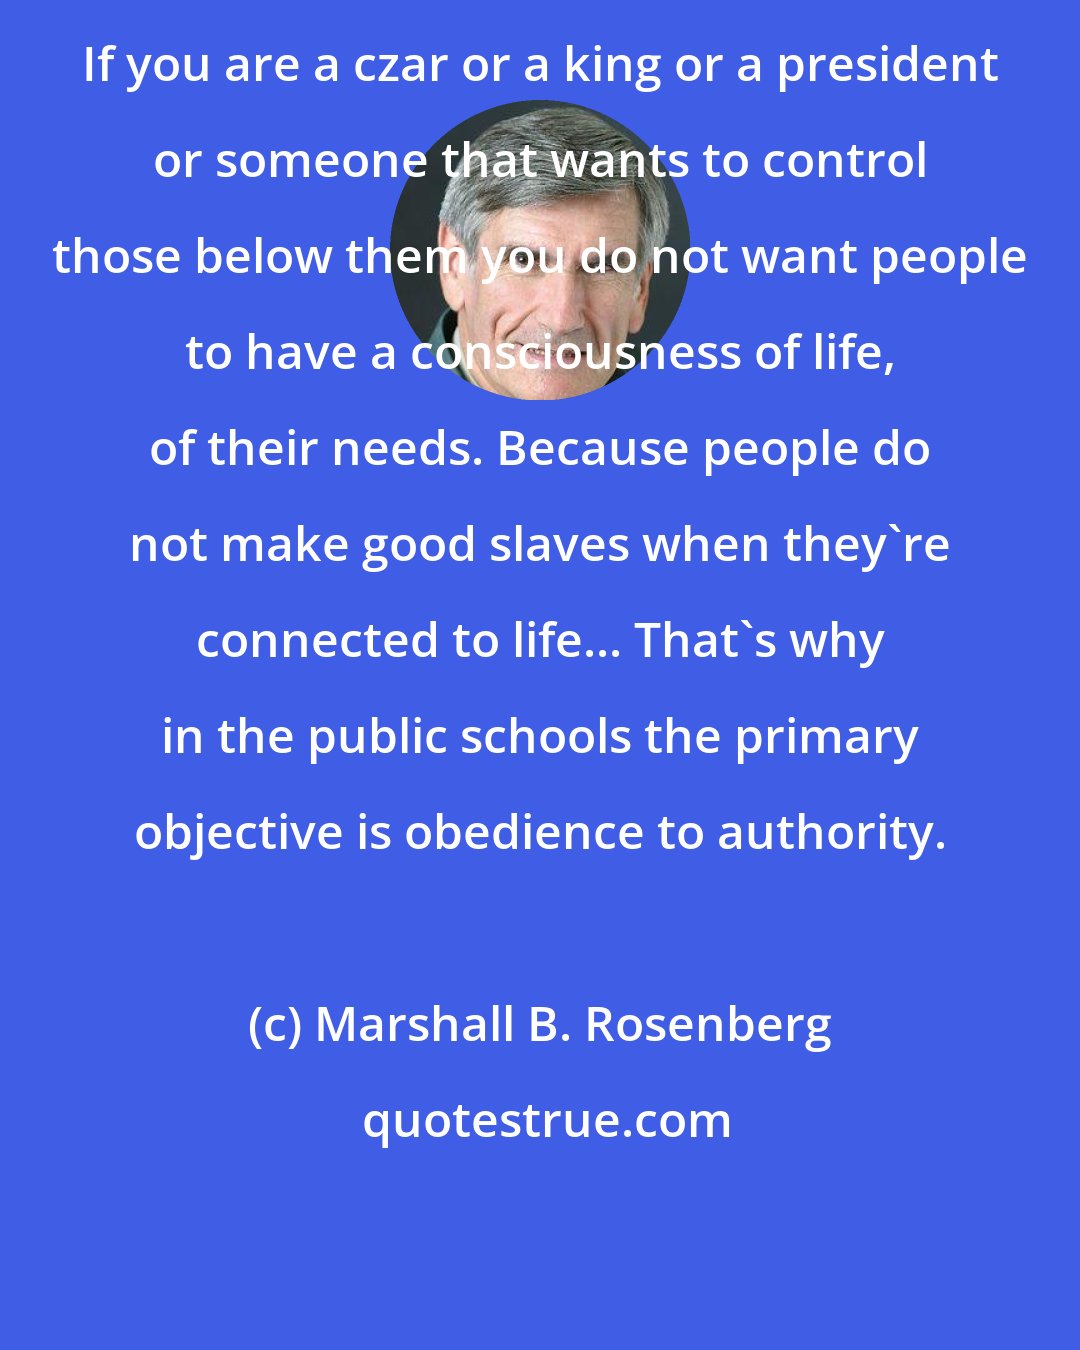 Marshall B. Rosenberg: If you are a czar or a king or a president or someone that wants to control those below them you do not want people to have a consciousness of life, of their needs. Because people do not make good slaves when they're connected to life... That's why in the public schools the primary objective is obedience to authority.